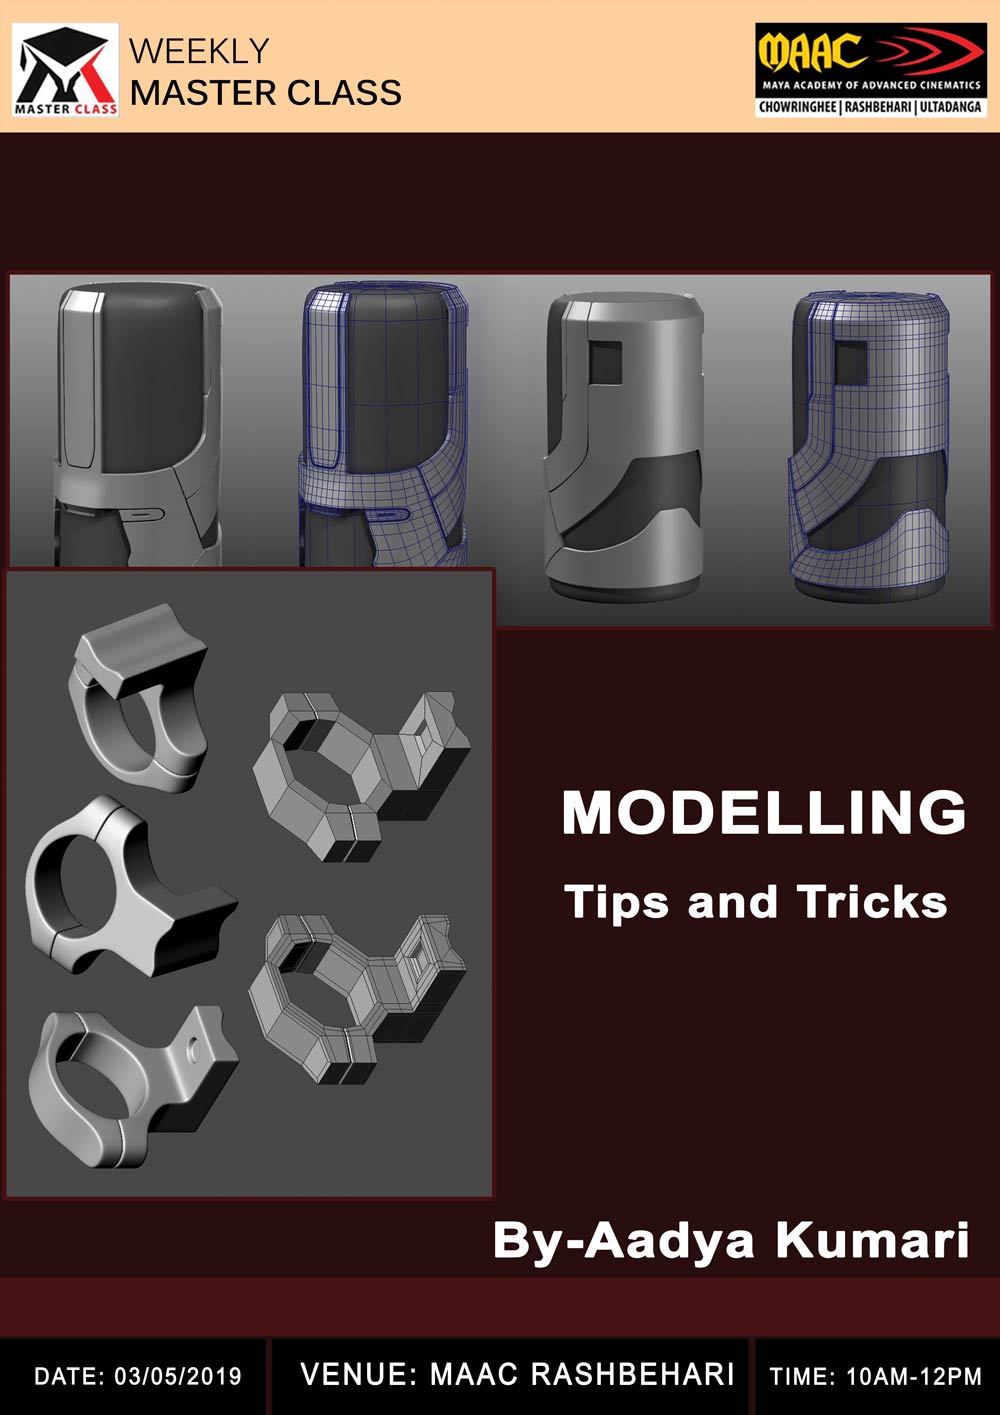 Weekly Master Class on 3D Modeling Tips & Tricks